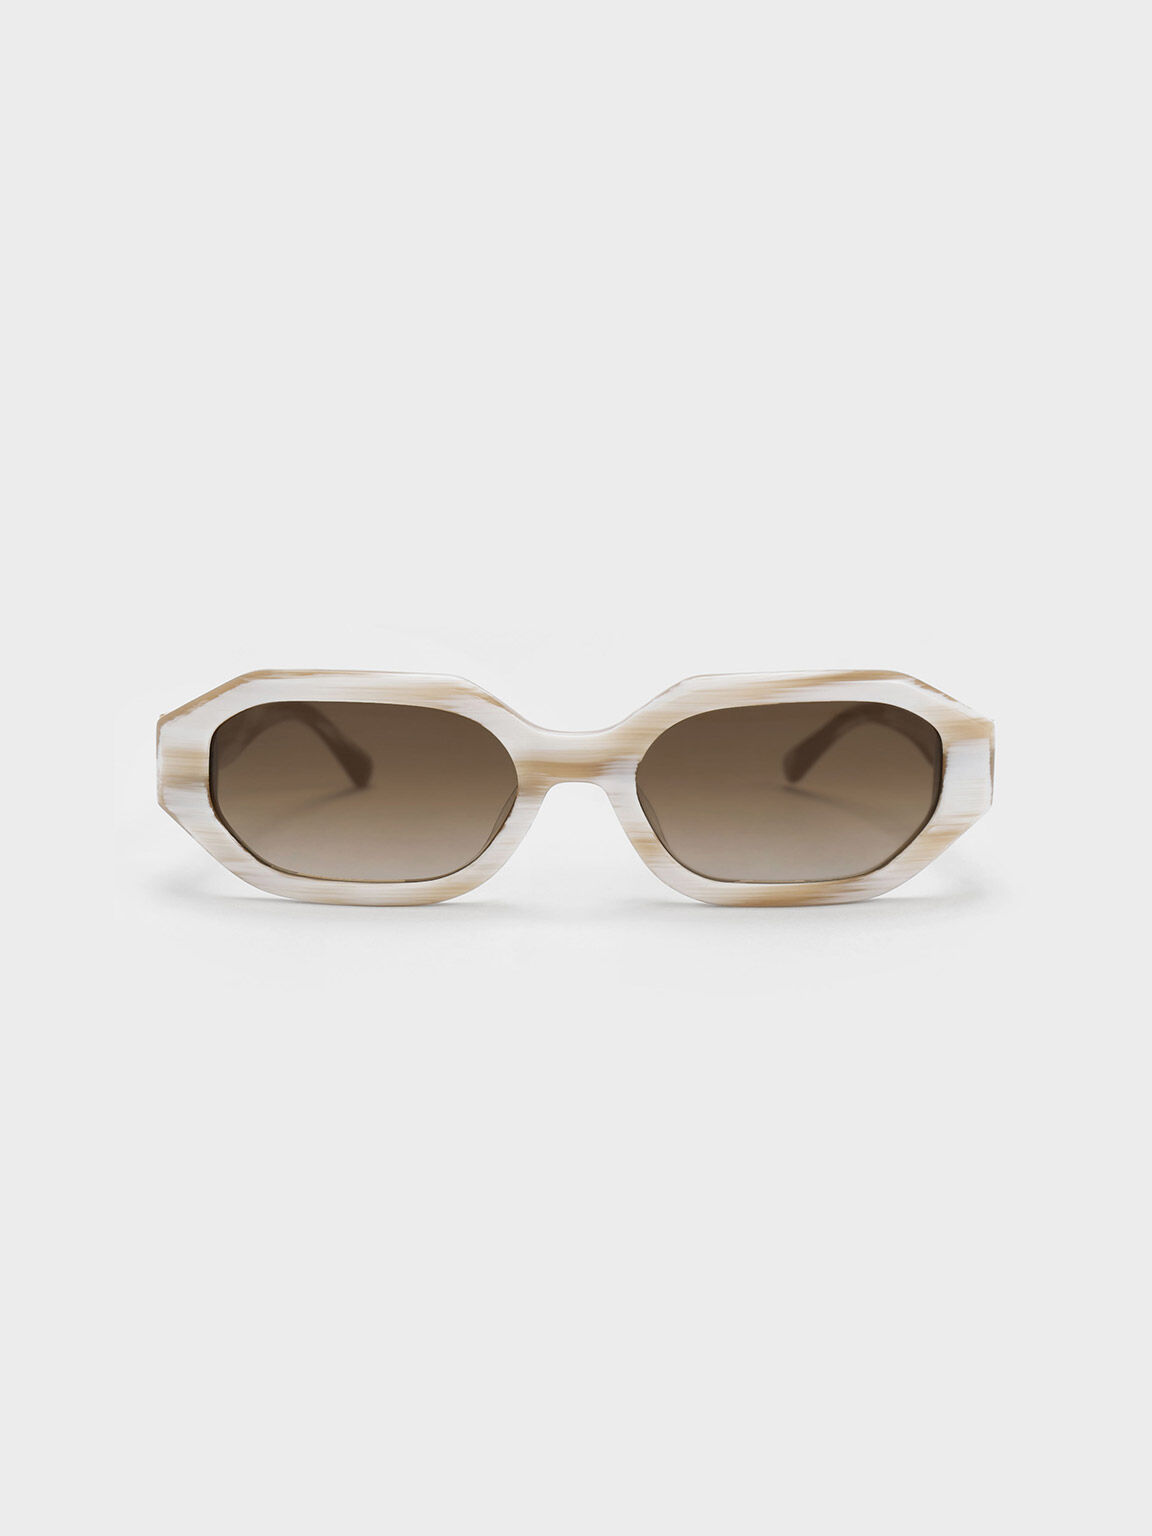 Women's Sunglasses | Exclusives Styles | CHARLES & KEITH SG